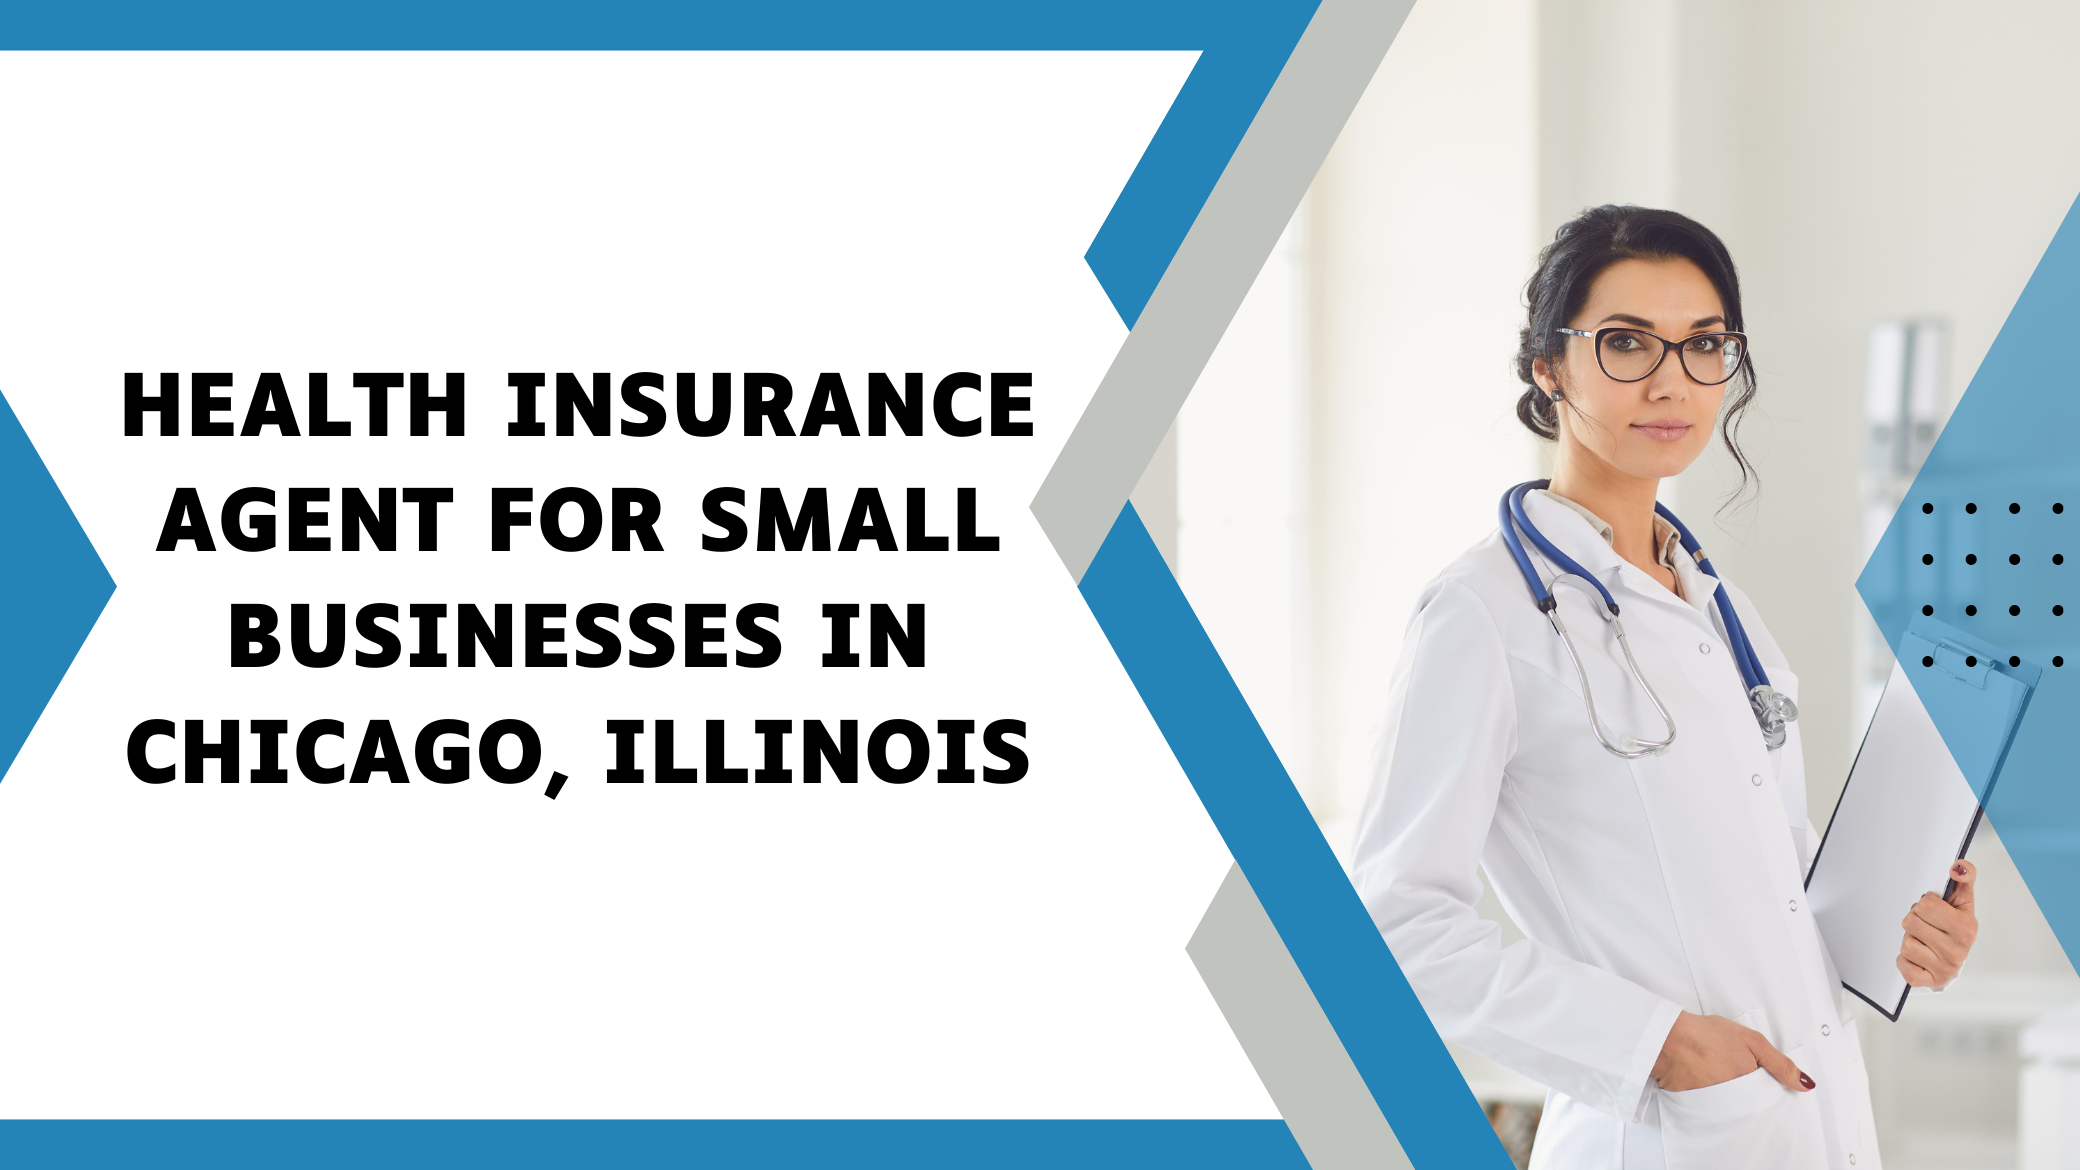 Health Insurance Agent For Small Businesses In Chicago, Illinois